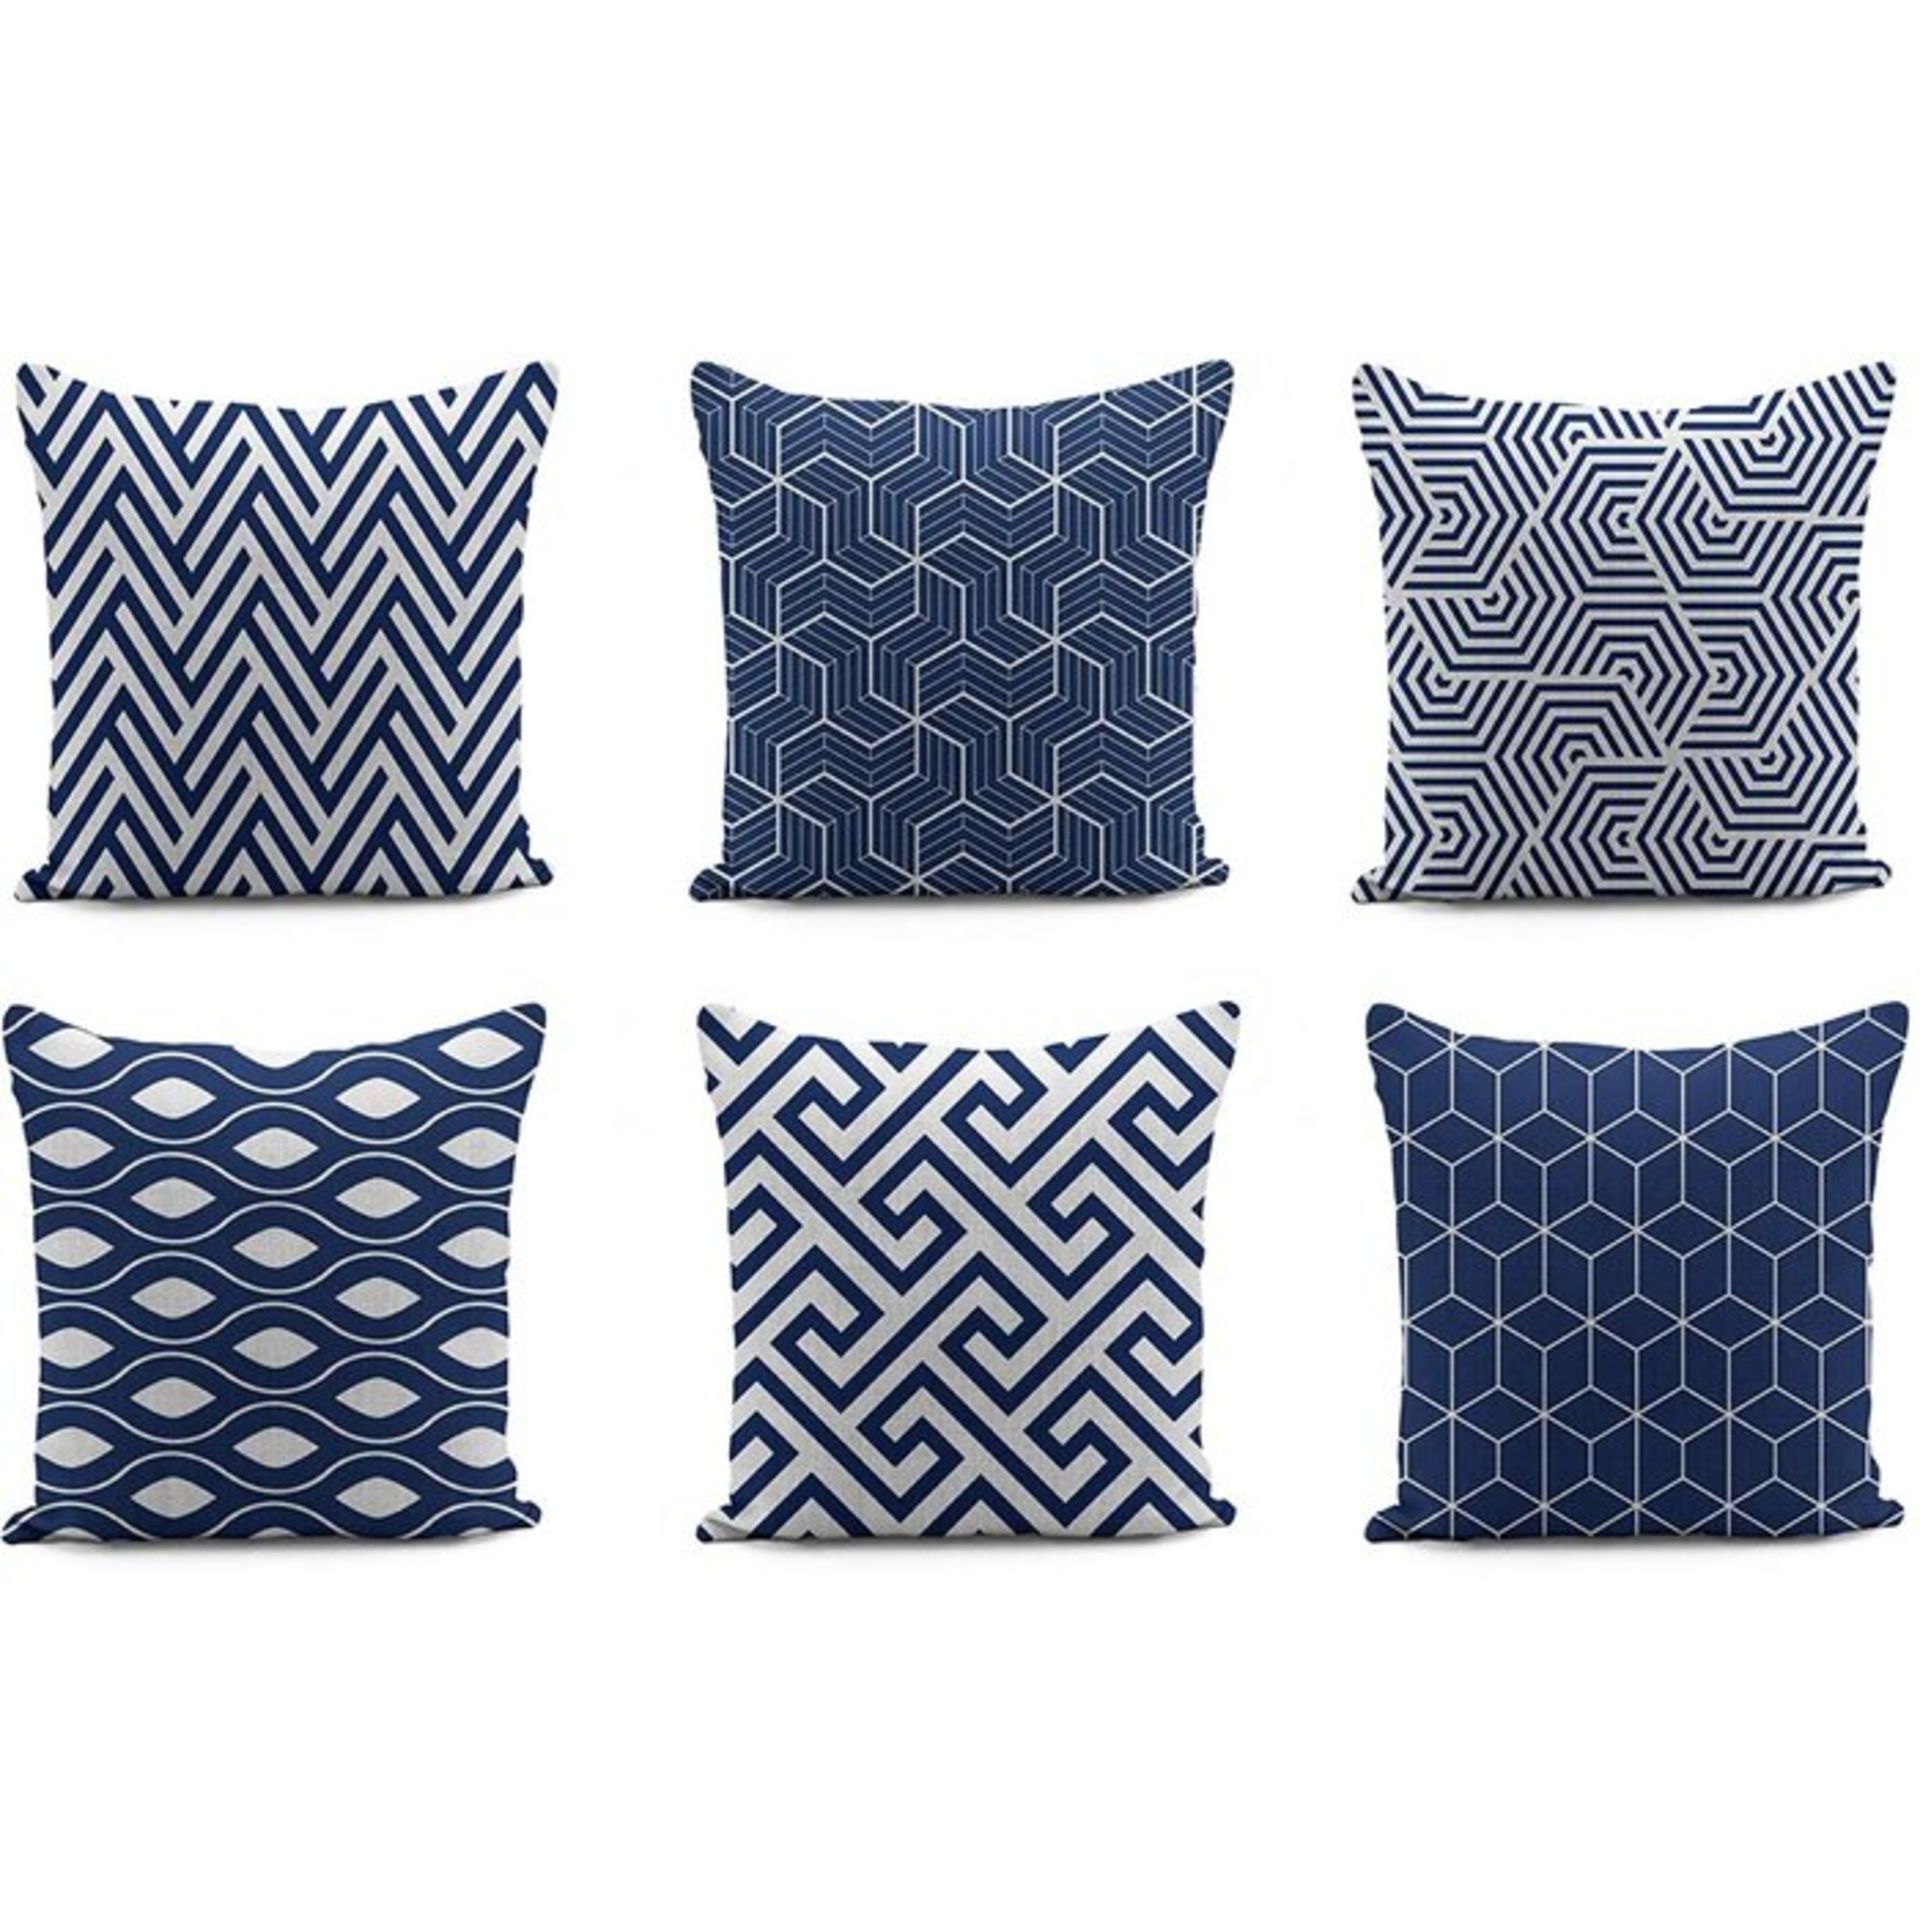 Aelia Cushion Cover (Set of 6) - RRP £31.99 COVERS ONLY